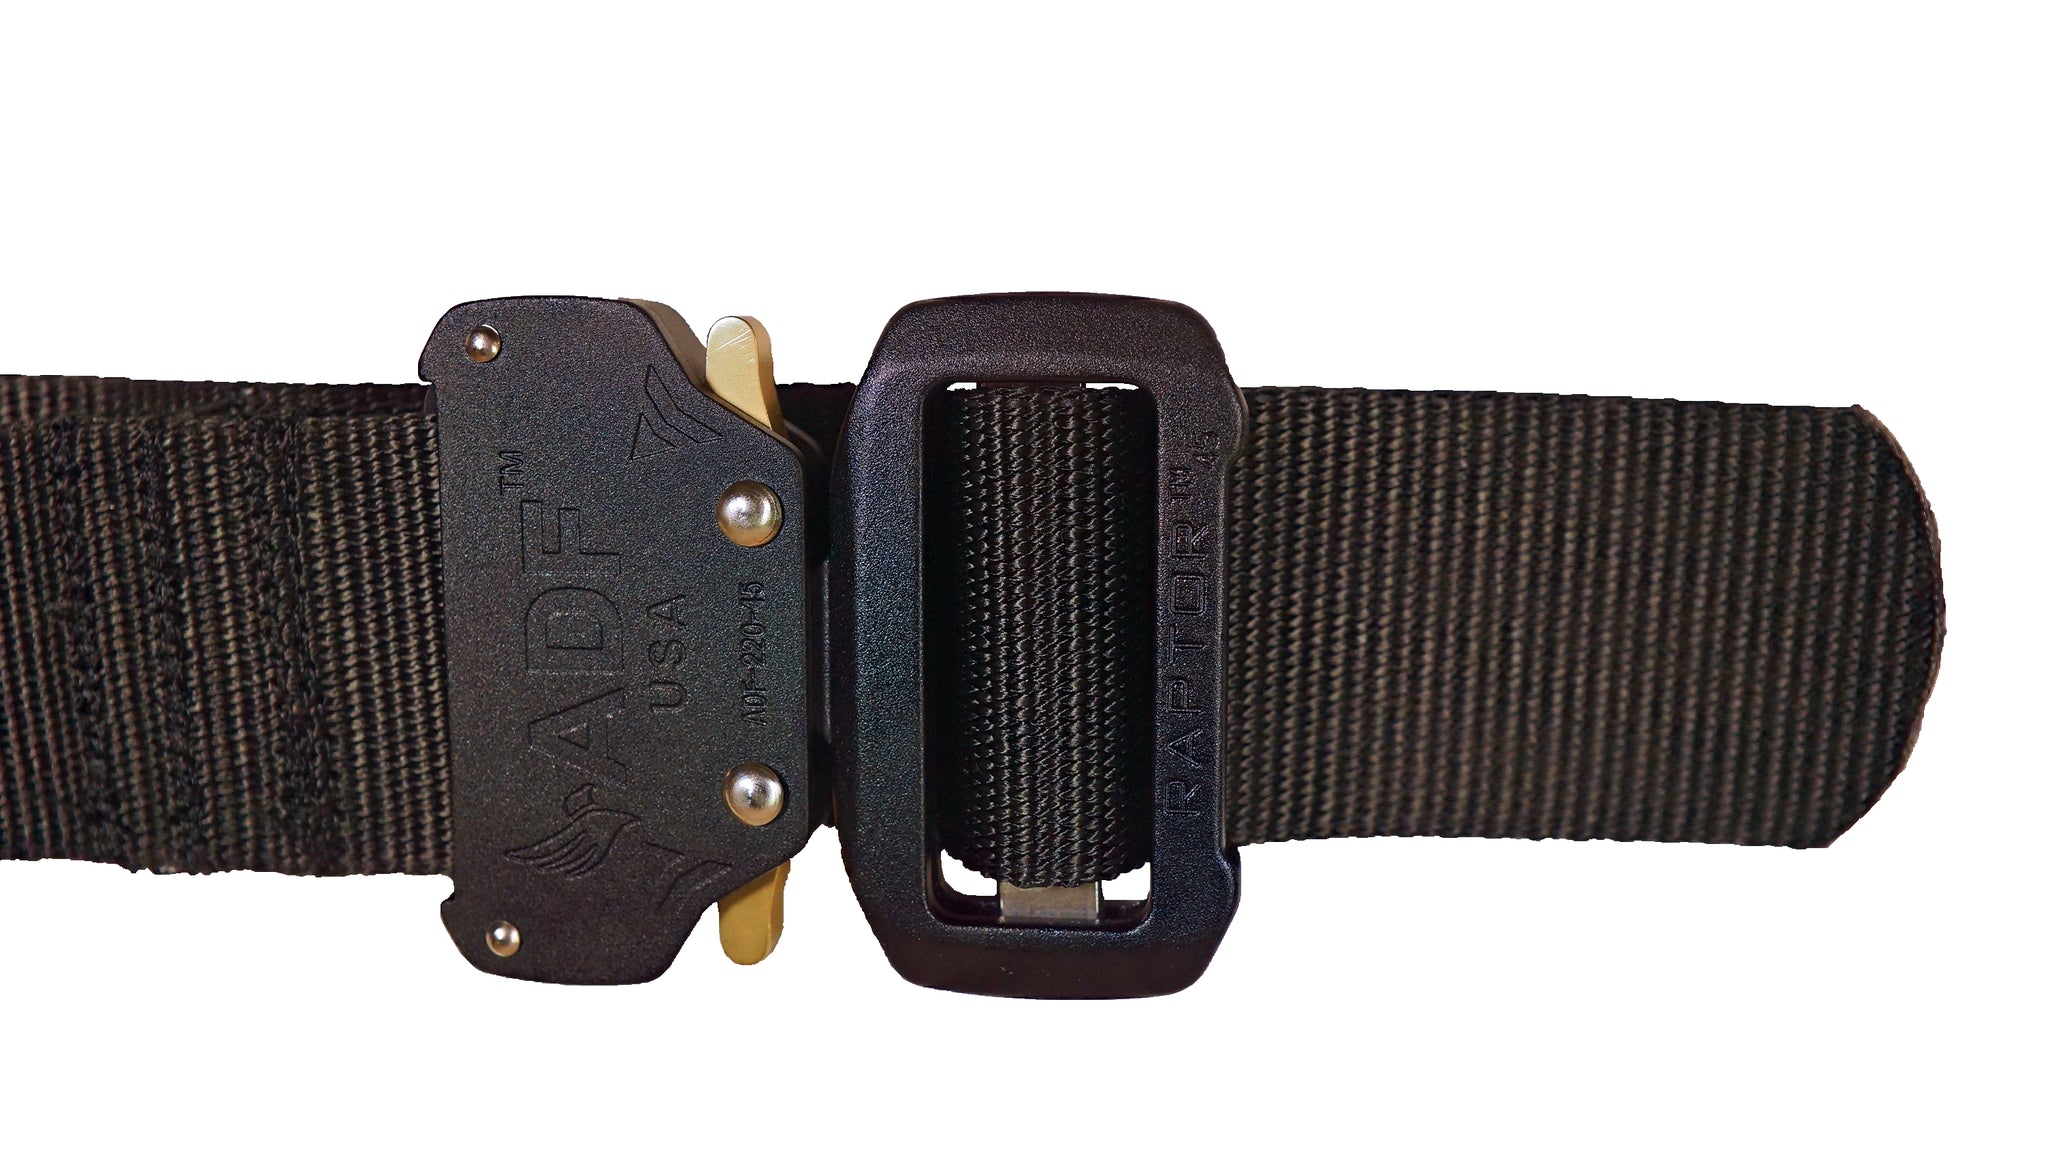 Black DBF Belt: Zoomed-in view of Raptor buckle with rivets and quick-release latches